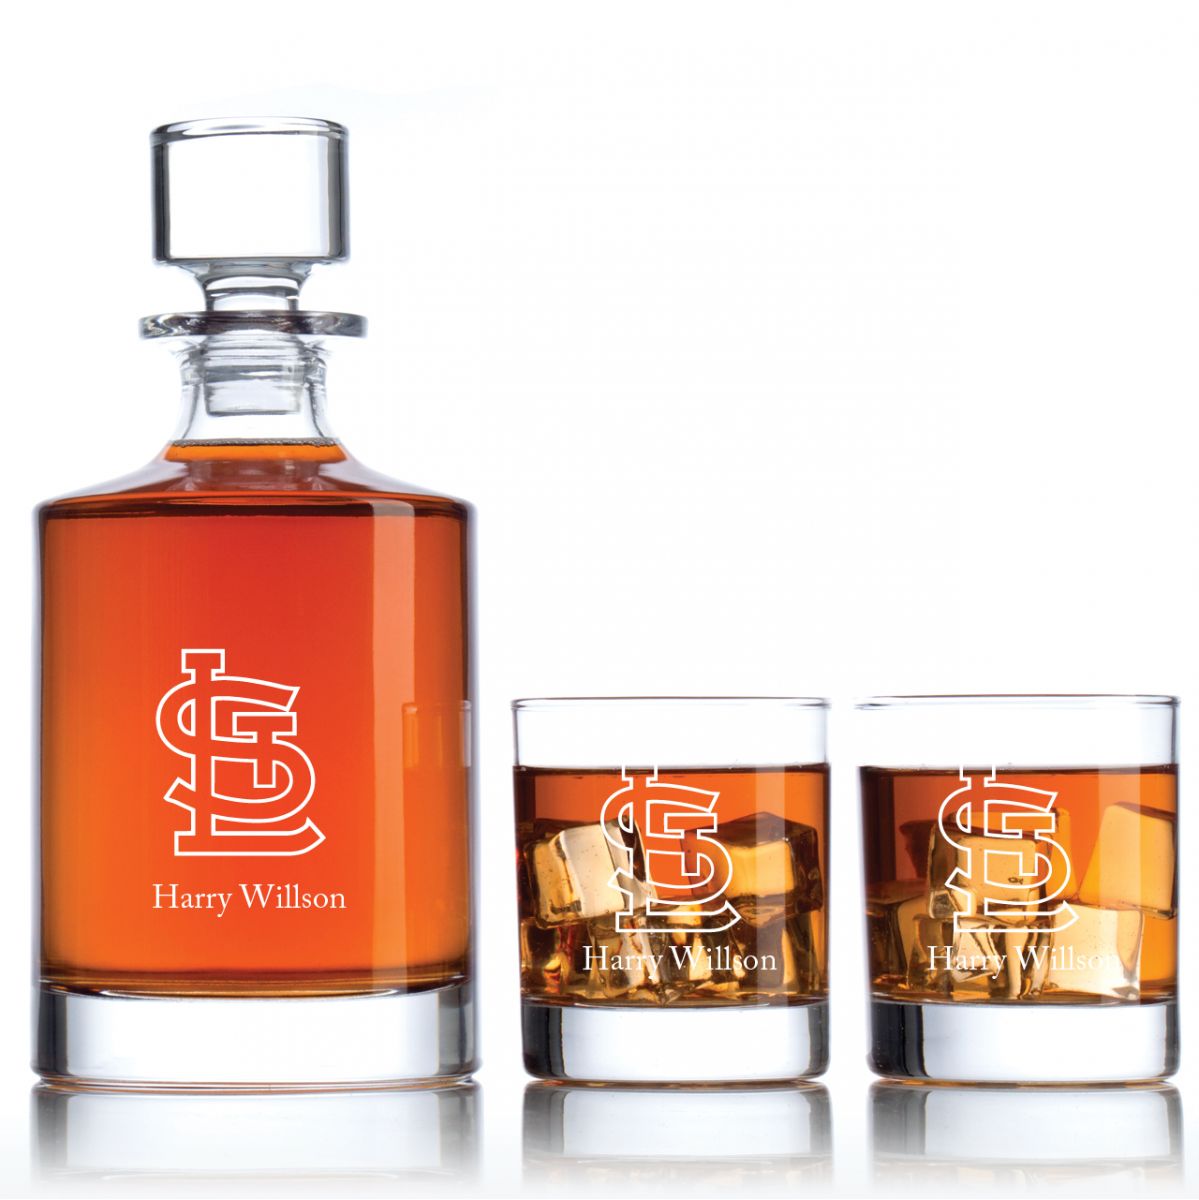 Engraved St Louis Cardinals - Personalized Bellagio Decanter Set with Old Fashioned Whiskey ...